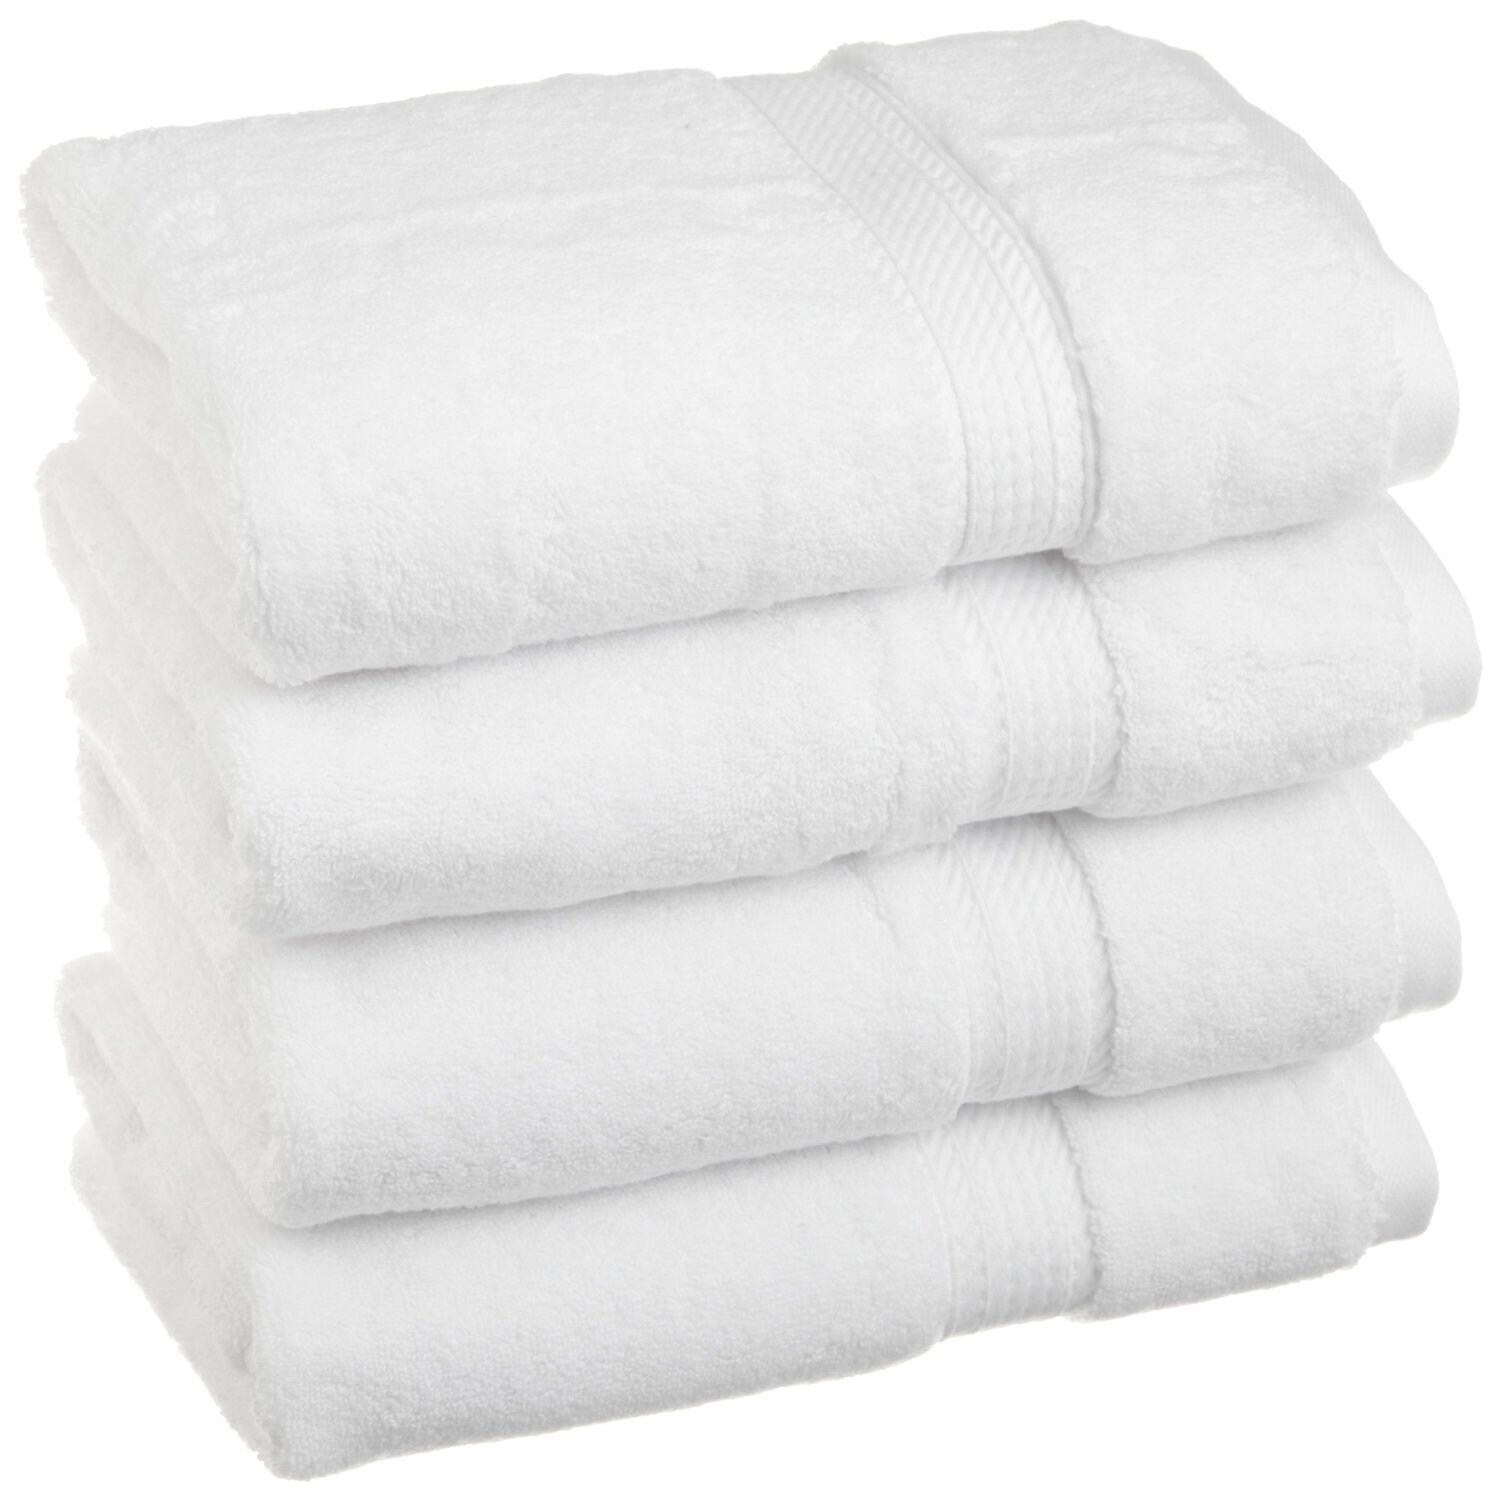 https://ak1.ostkcdn.com/images/products/5841944/Superior-Luxurious-and-Absorbent-900-GSM-Combed-Cotton-Hand-Towel-Set-of-4-296d58bb-d470-4679-b8d1-1213910a6a04.jpg